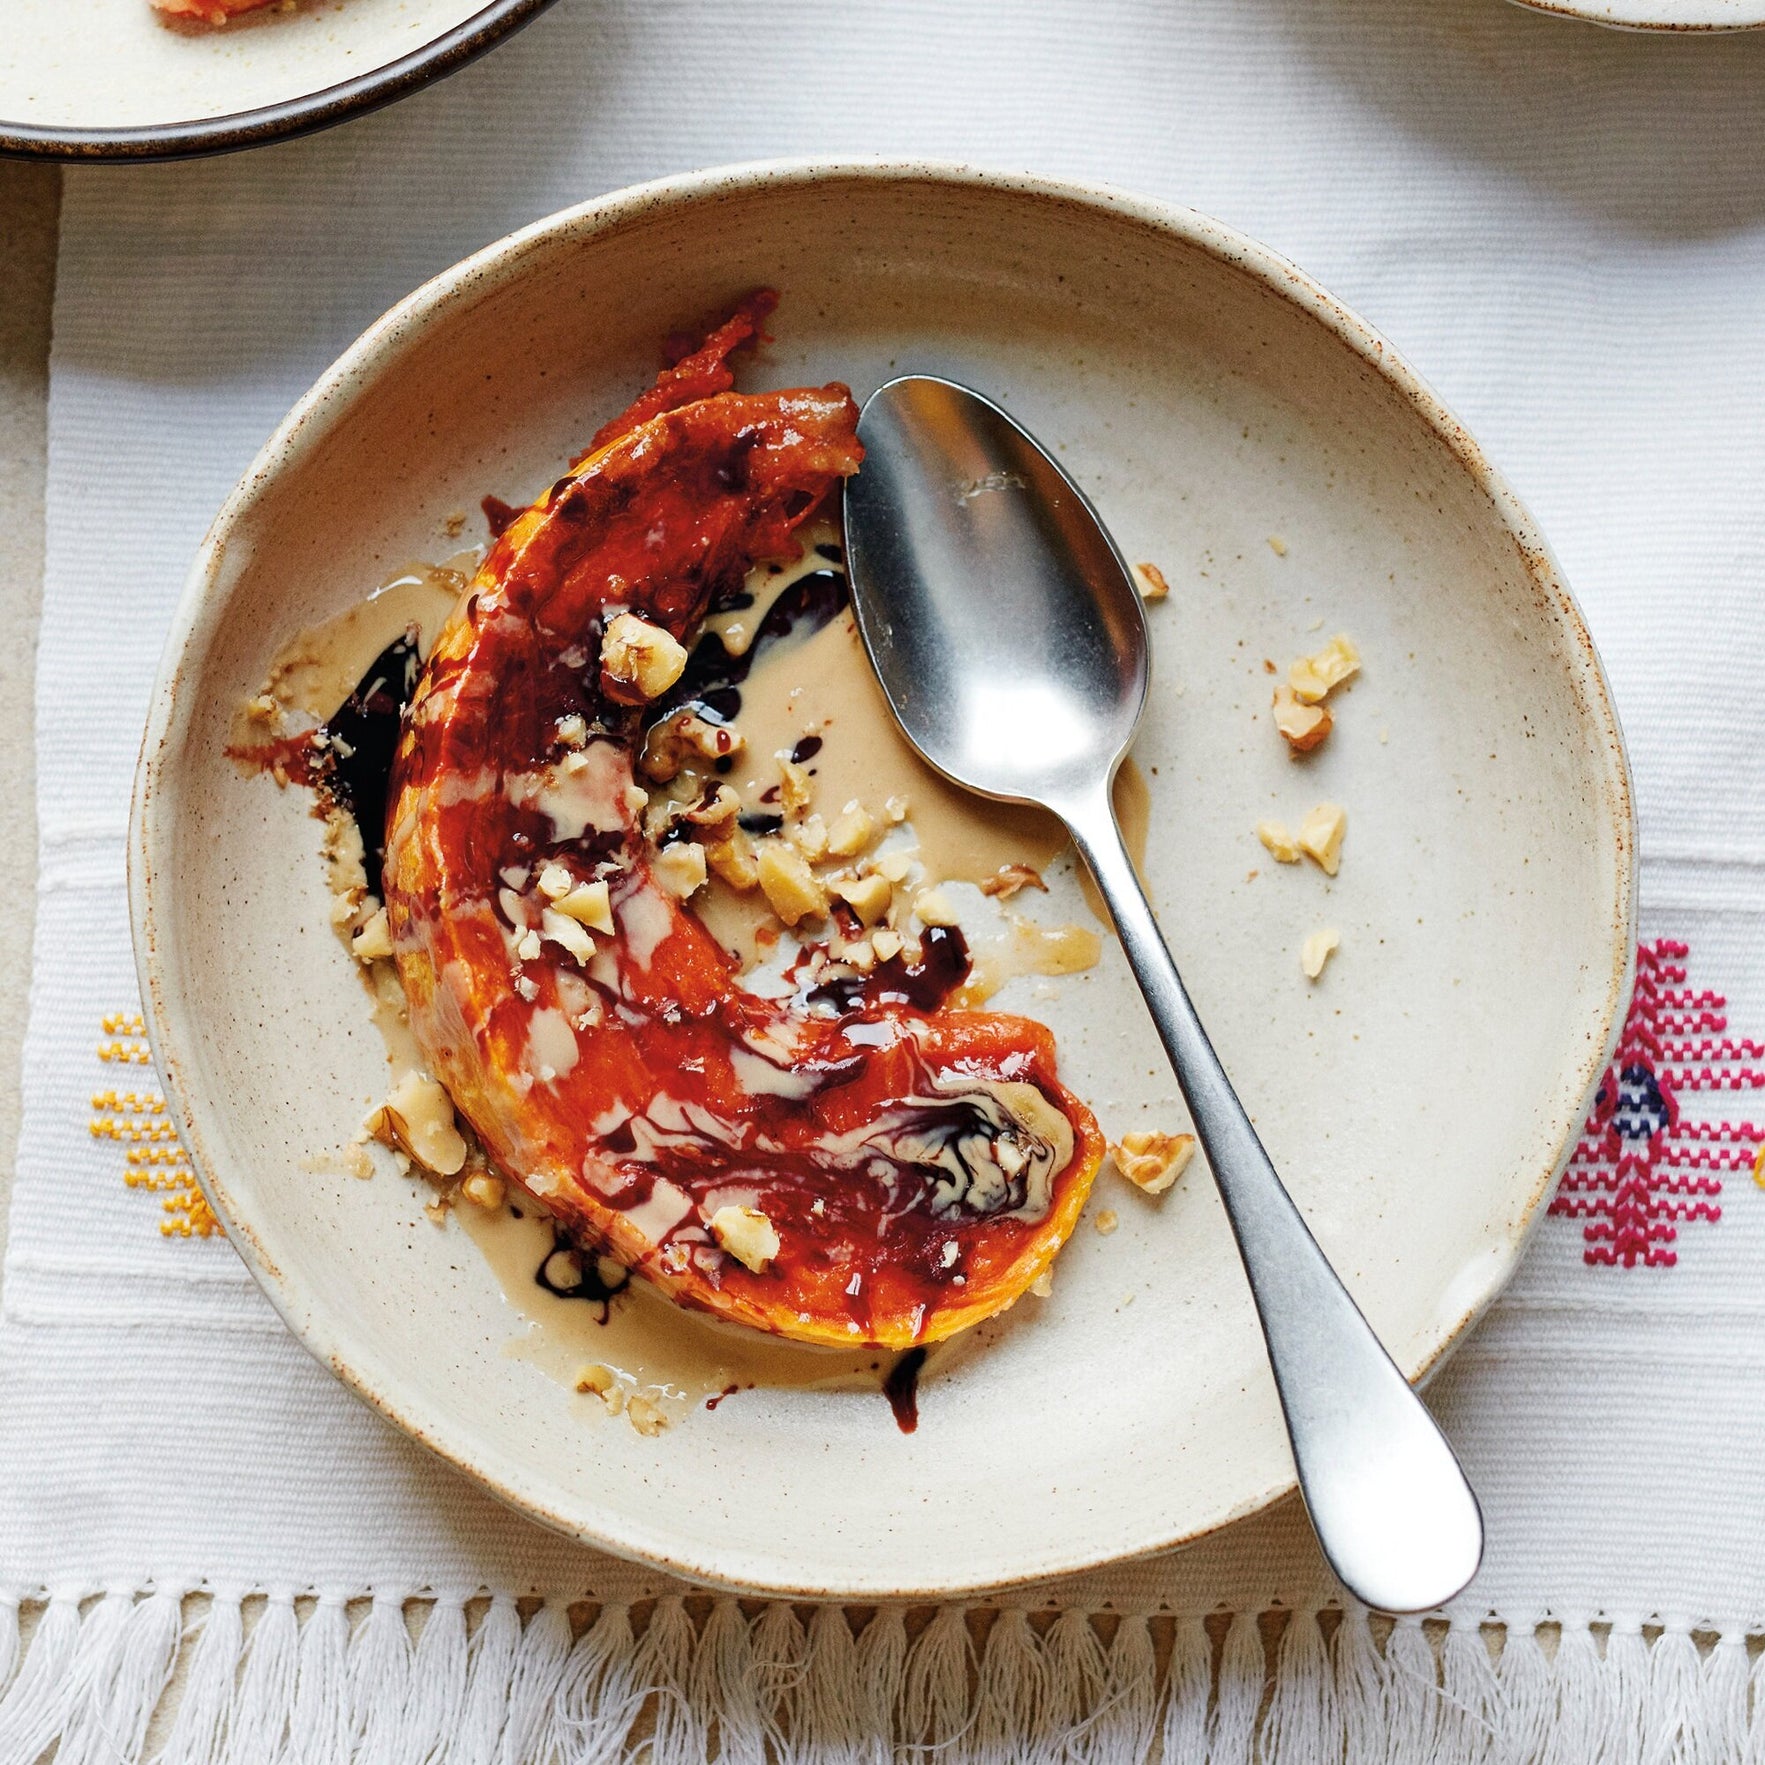 Yasmin Khan's Candied Pumpkin With Tahini And Date Syrup